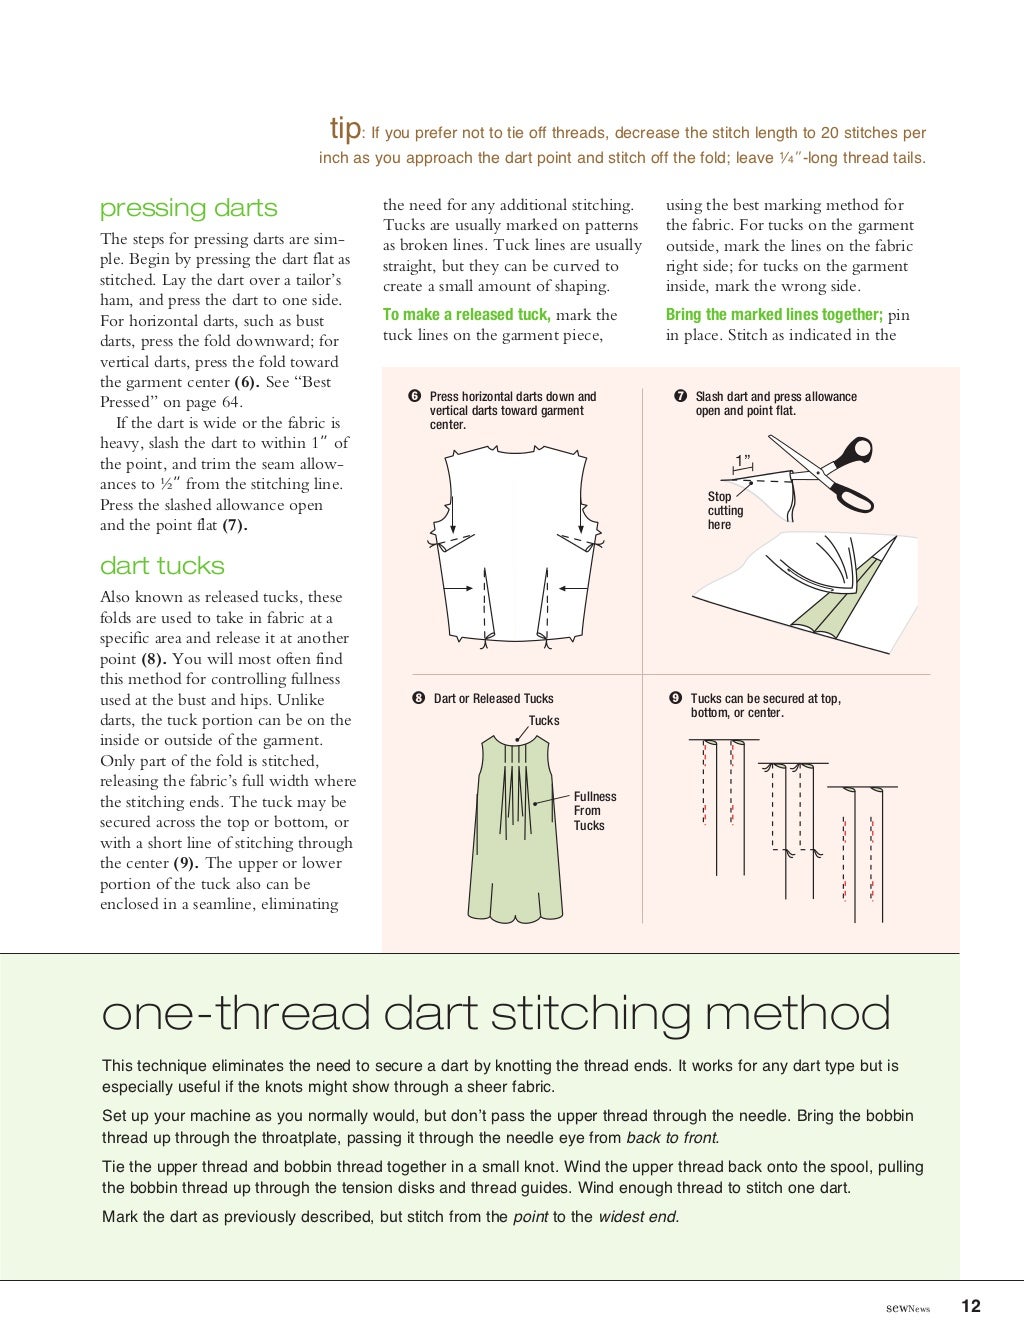 Sewing basics-from-sew-news